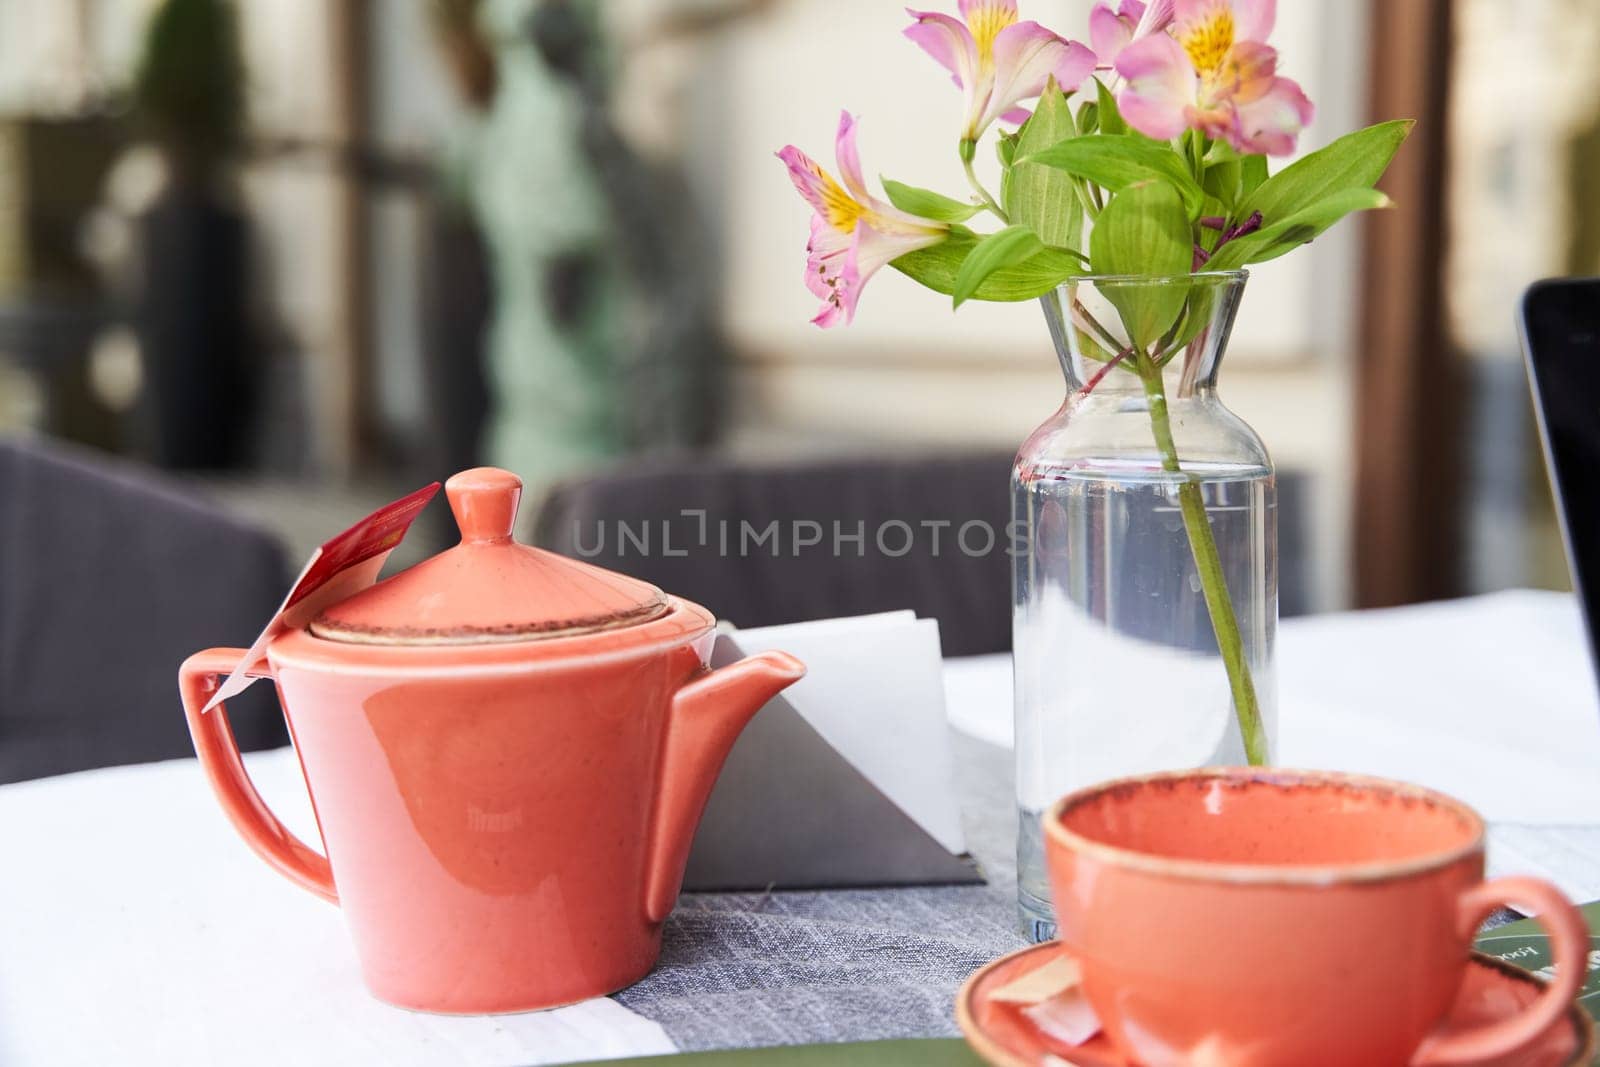 Tbilisi, Georgia - 22.04.2021: Flowers in a vase, a teapot and a cup on the table in a summer outdoor cafe. High quality photo